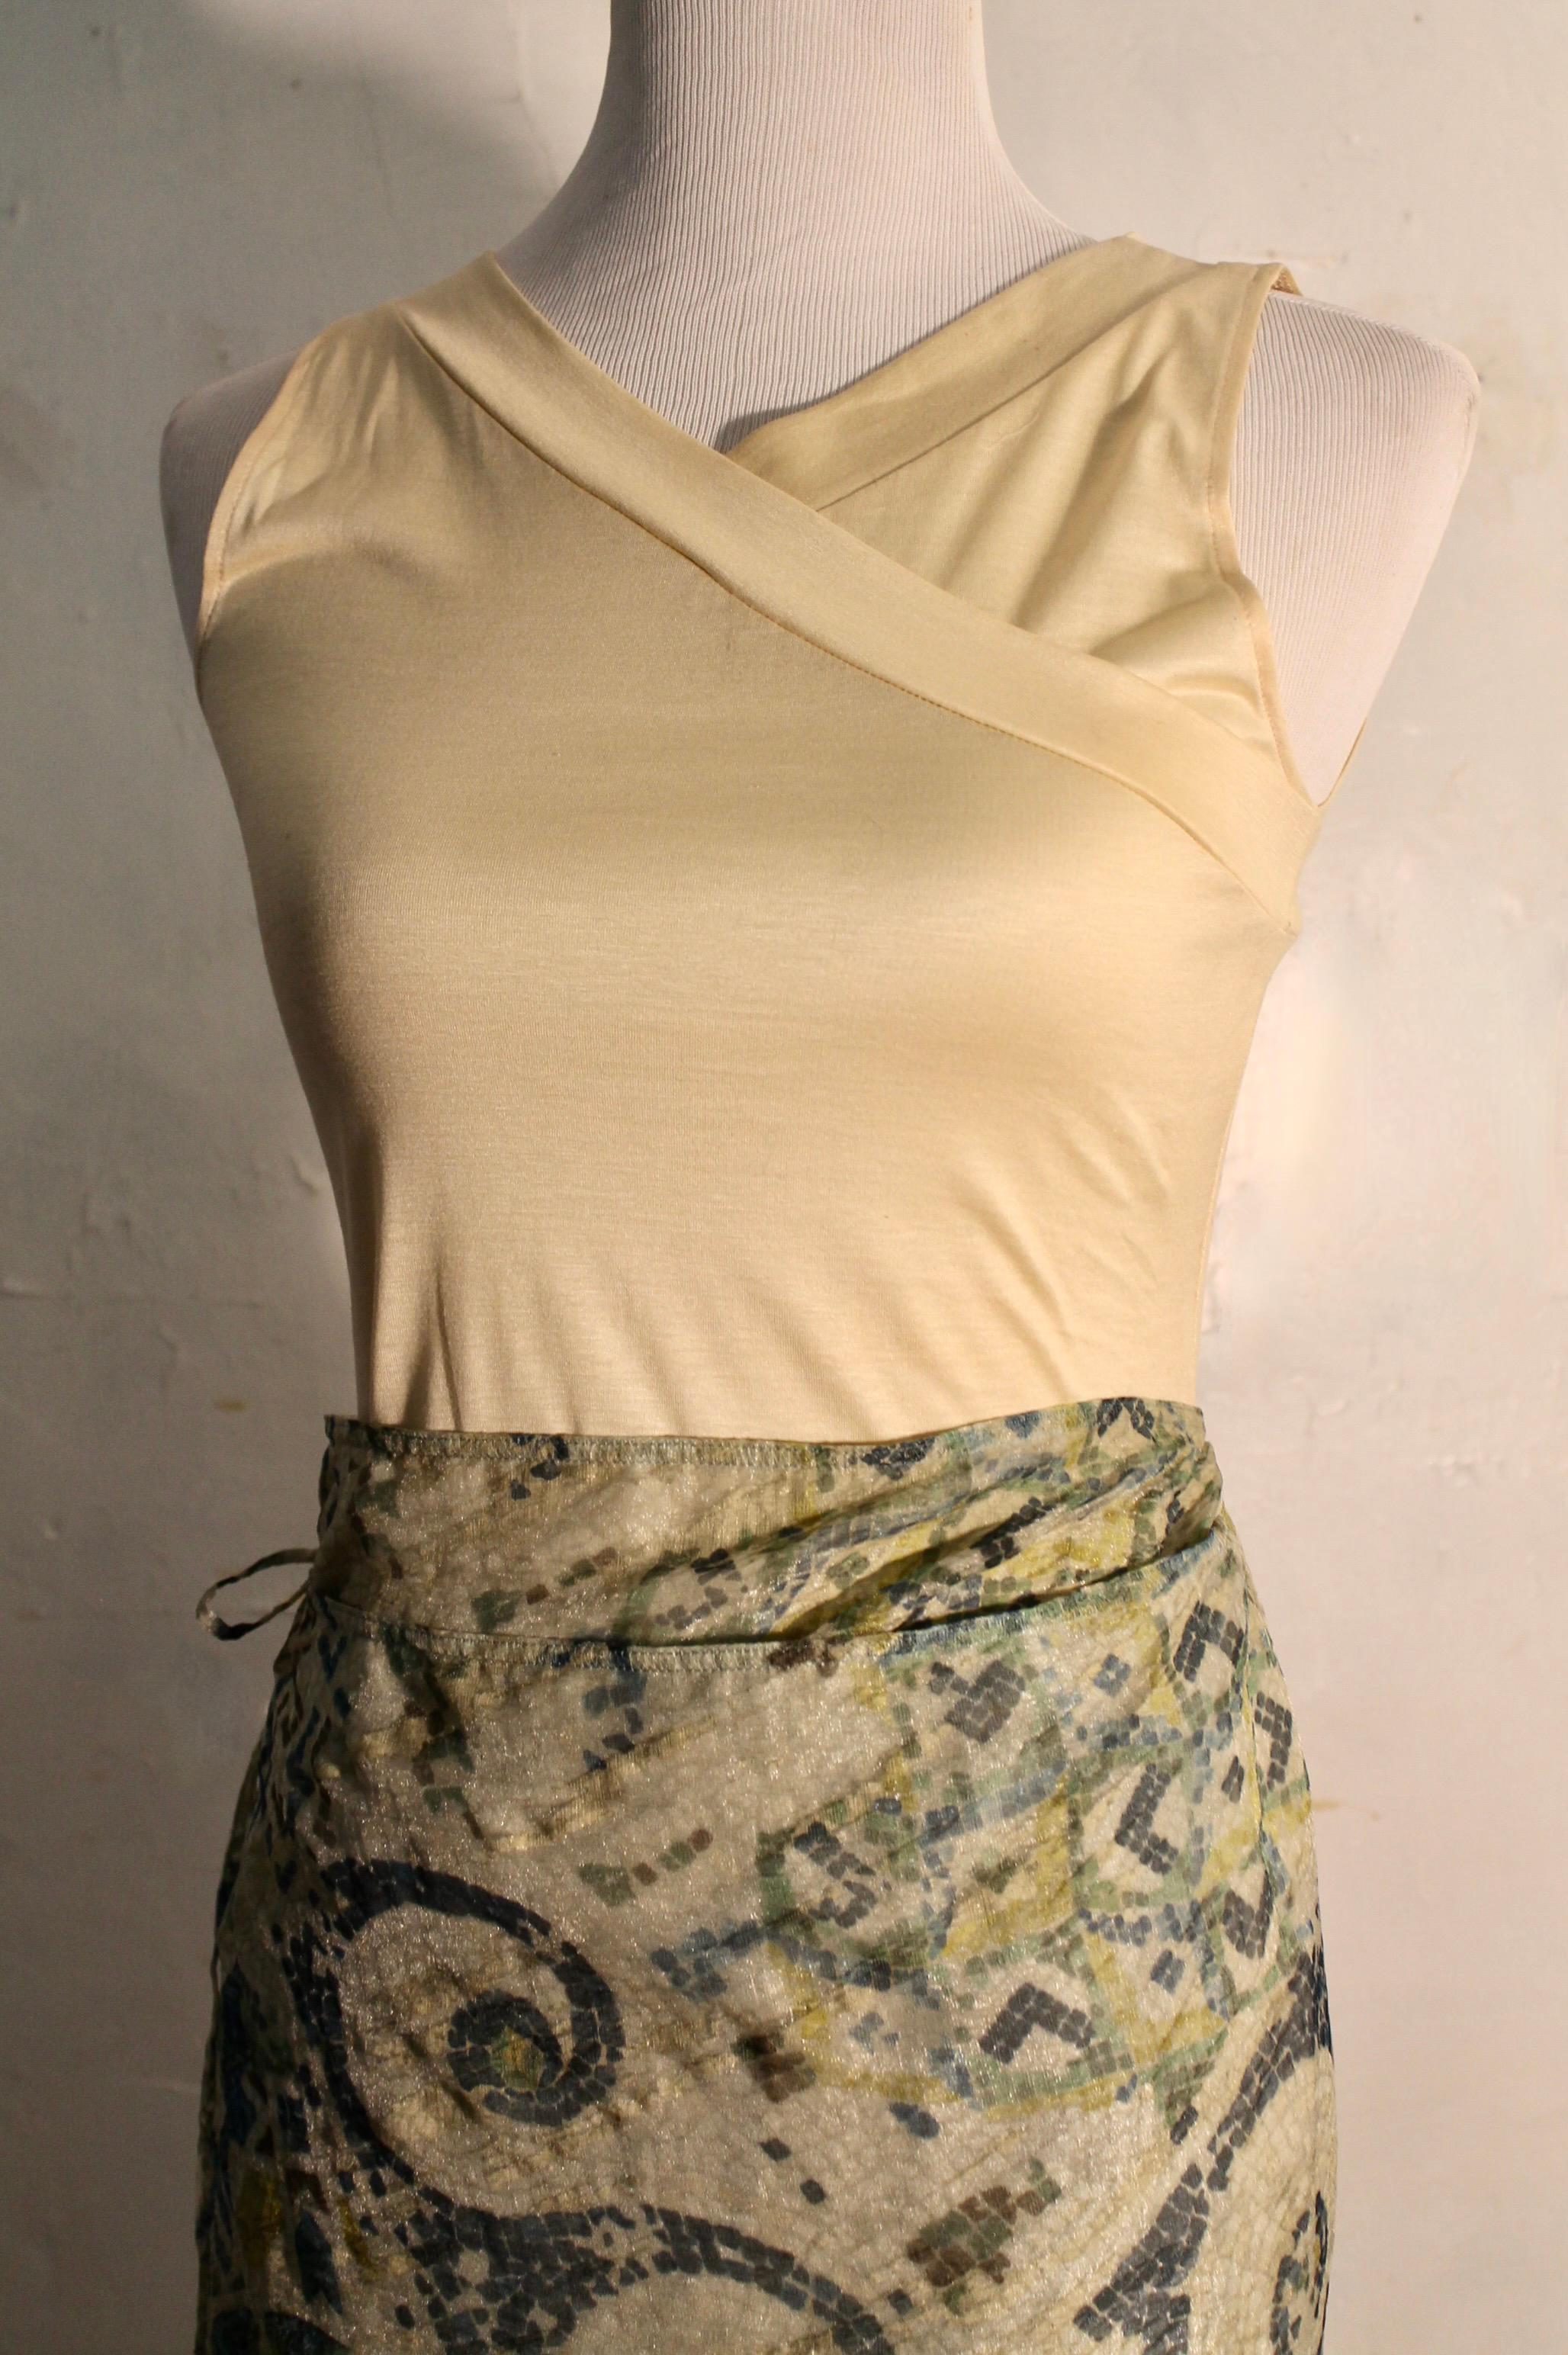 The front of the dress extends with a rectangular panel.  At the waist, the skirt becomes a wrap a round, and ties at the side. The skirt lining is cotton. 